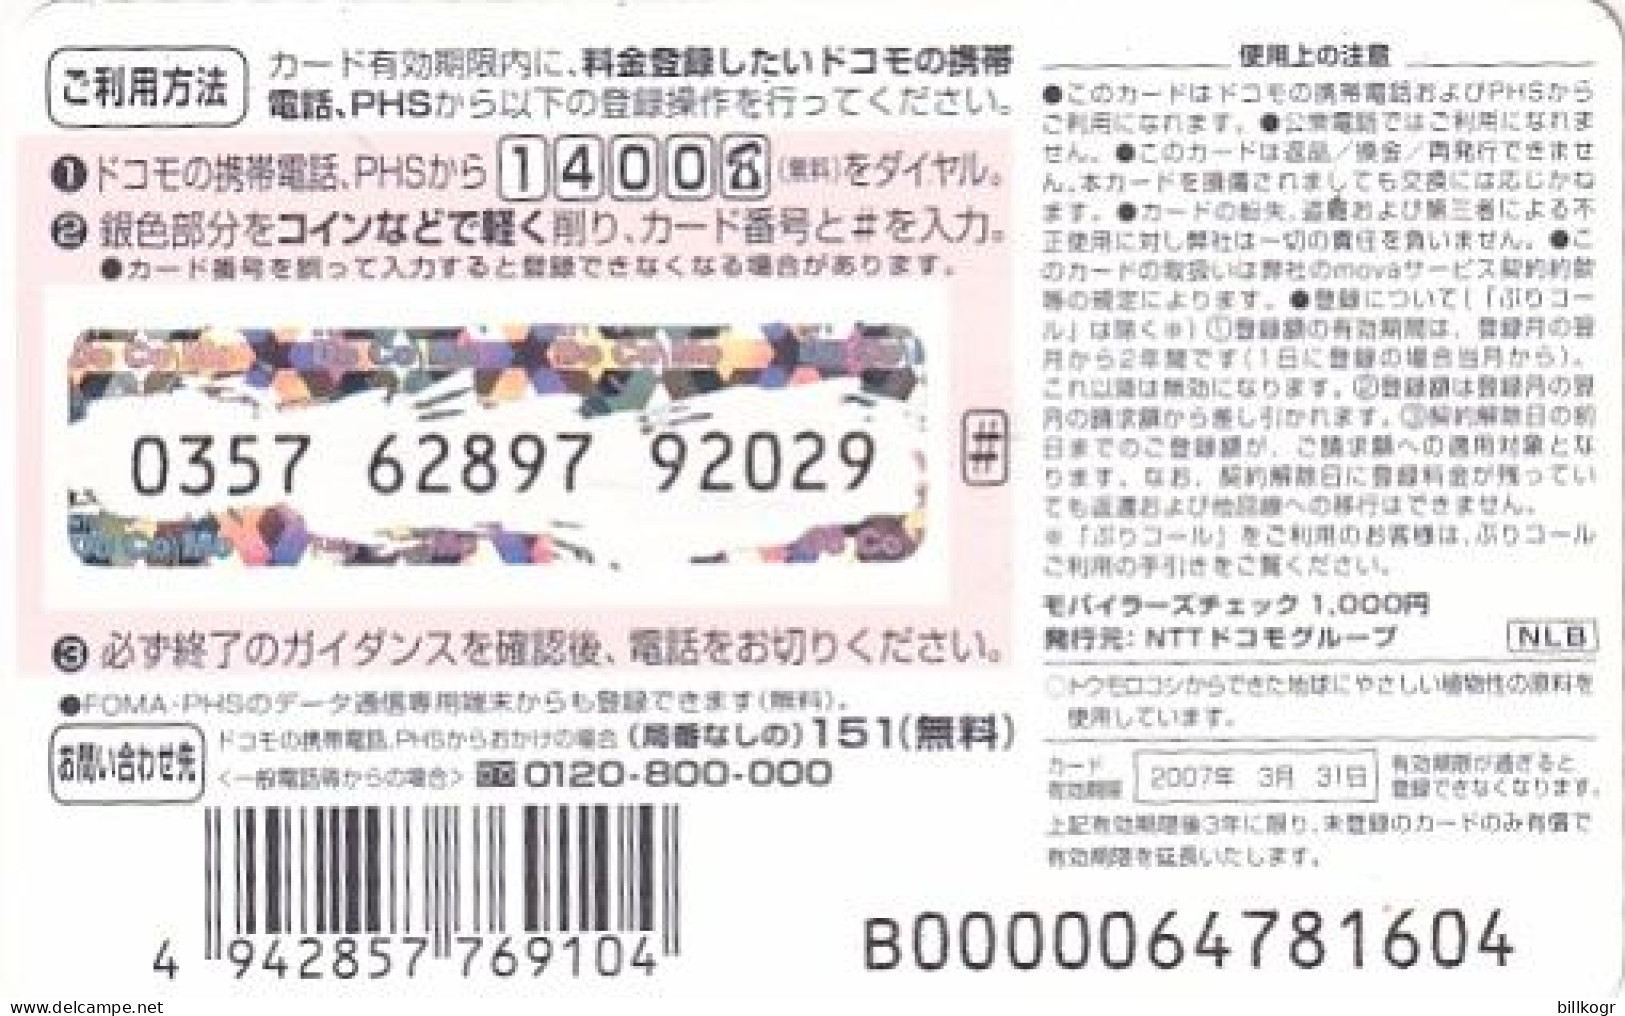 JAPAN - Dogs, Do Co Mo By NTT Prepaid Card Y1000, Exp.date 31/03/07, Used - Chiens